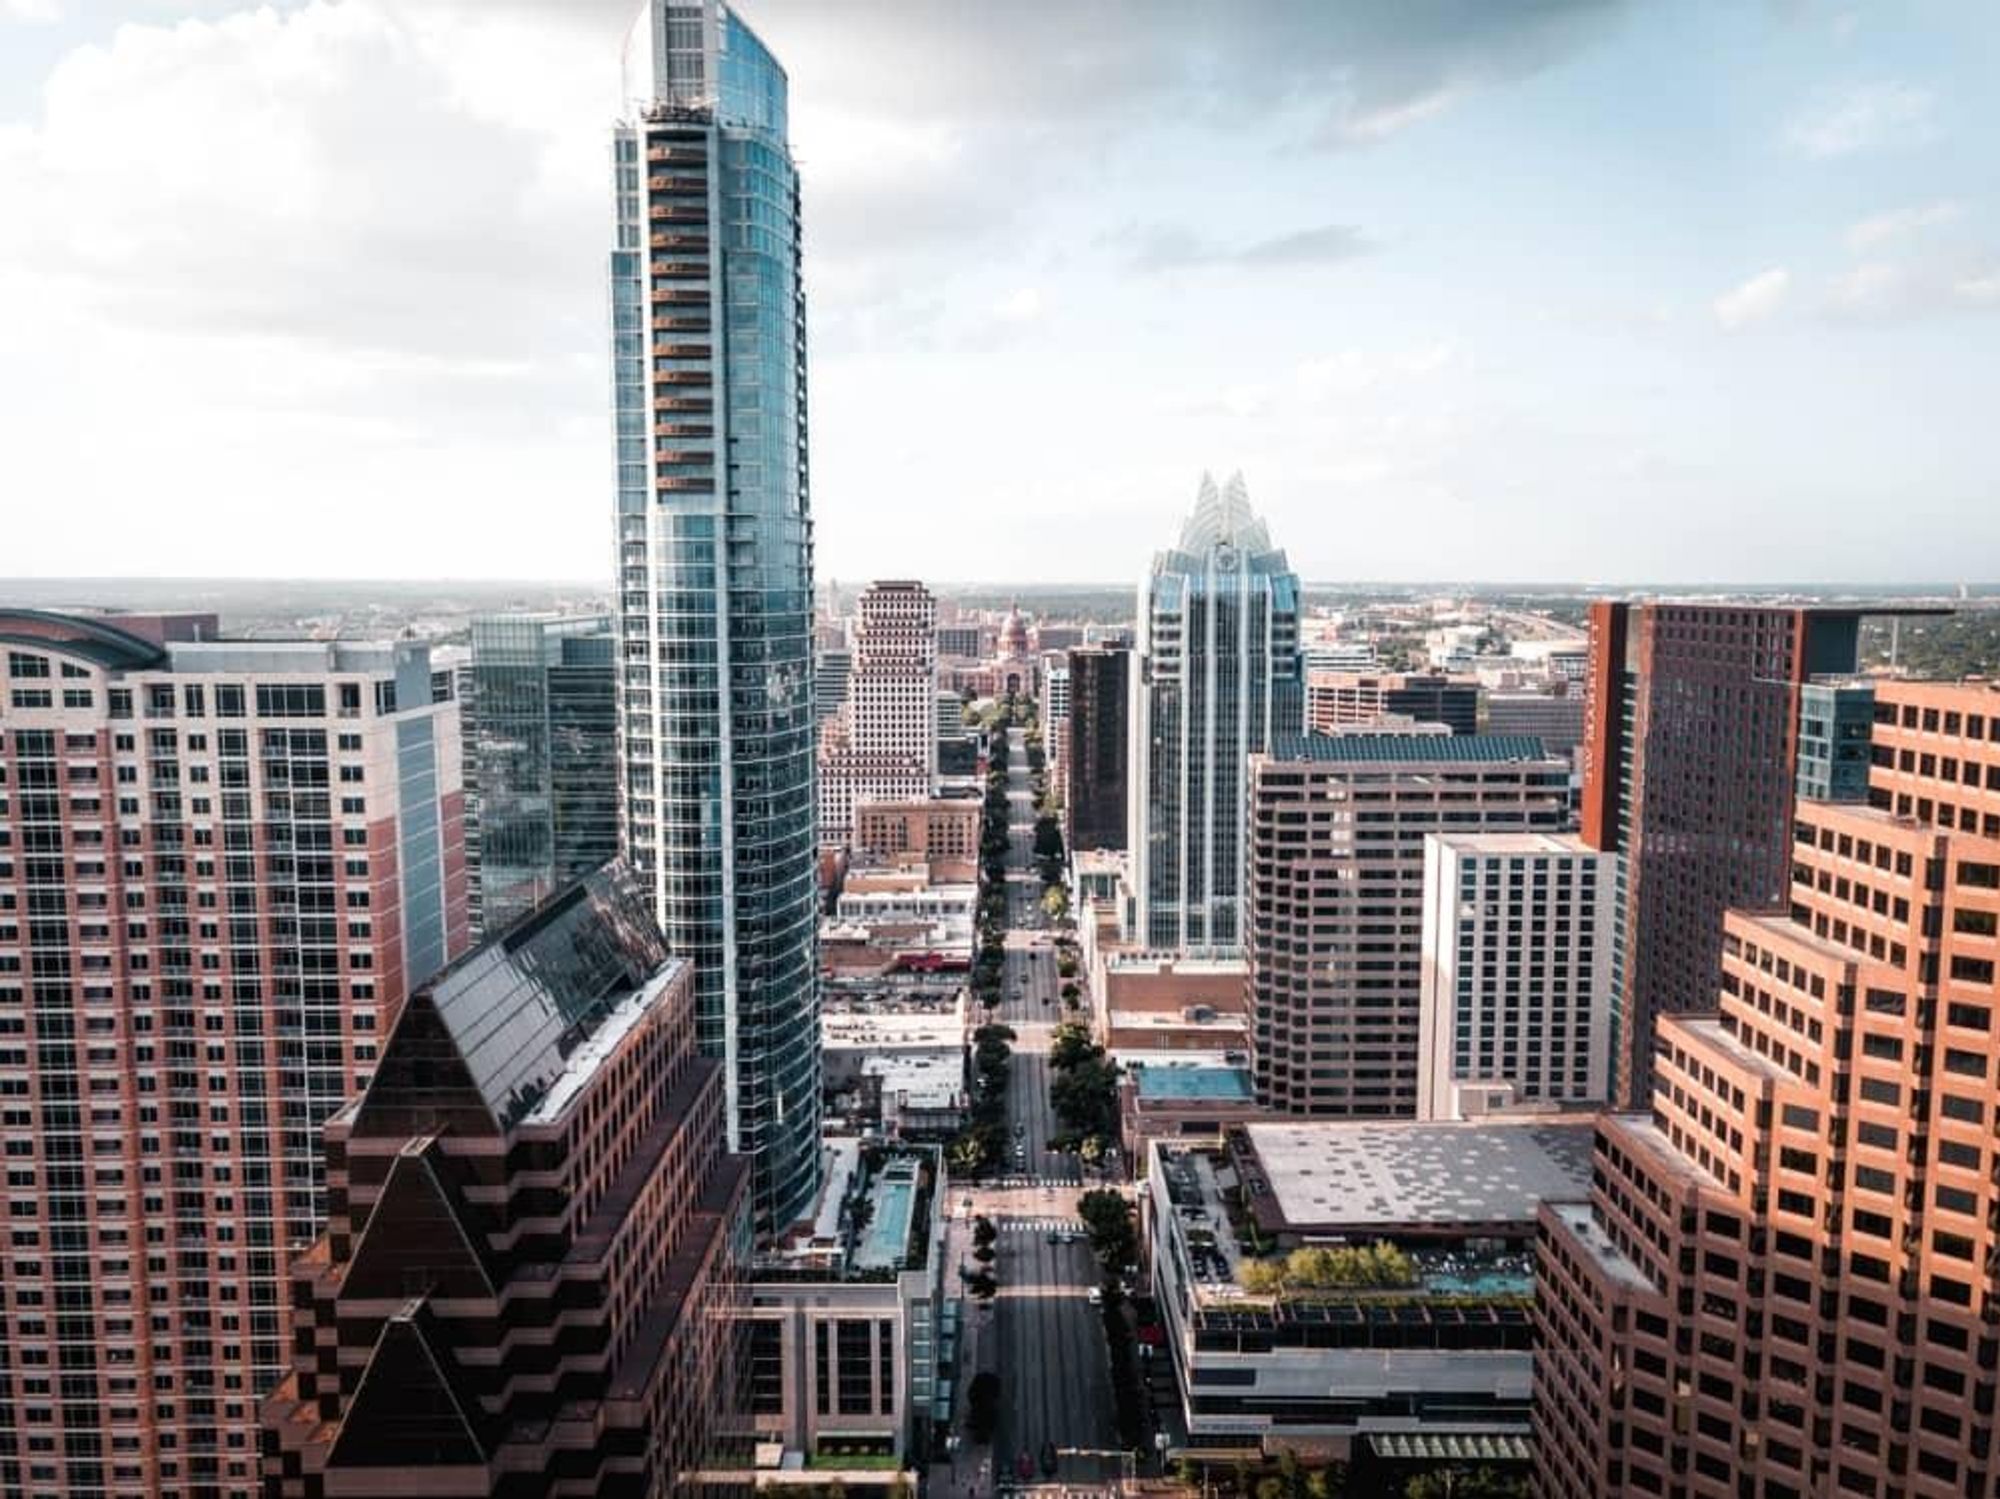 Hot Austin market rises to No. 1 spot for commercial real estate investment  in 2022 - CultureMap Austin